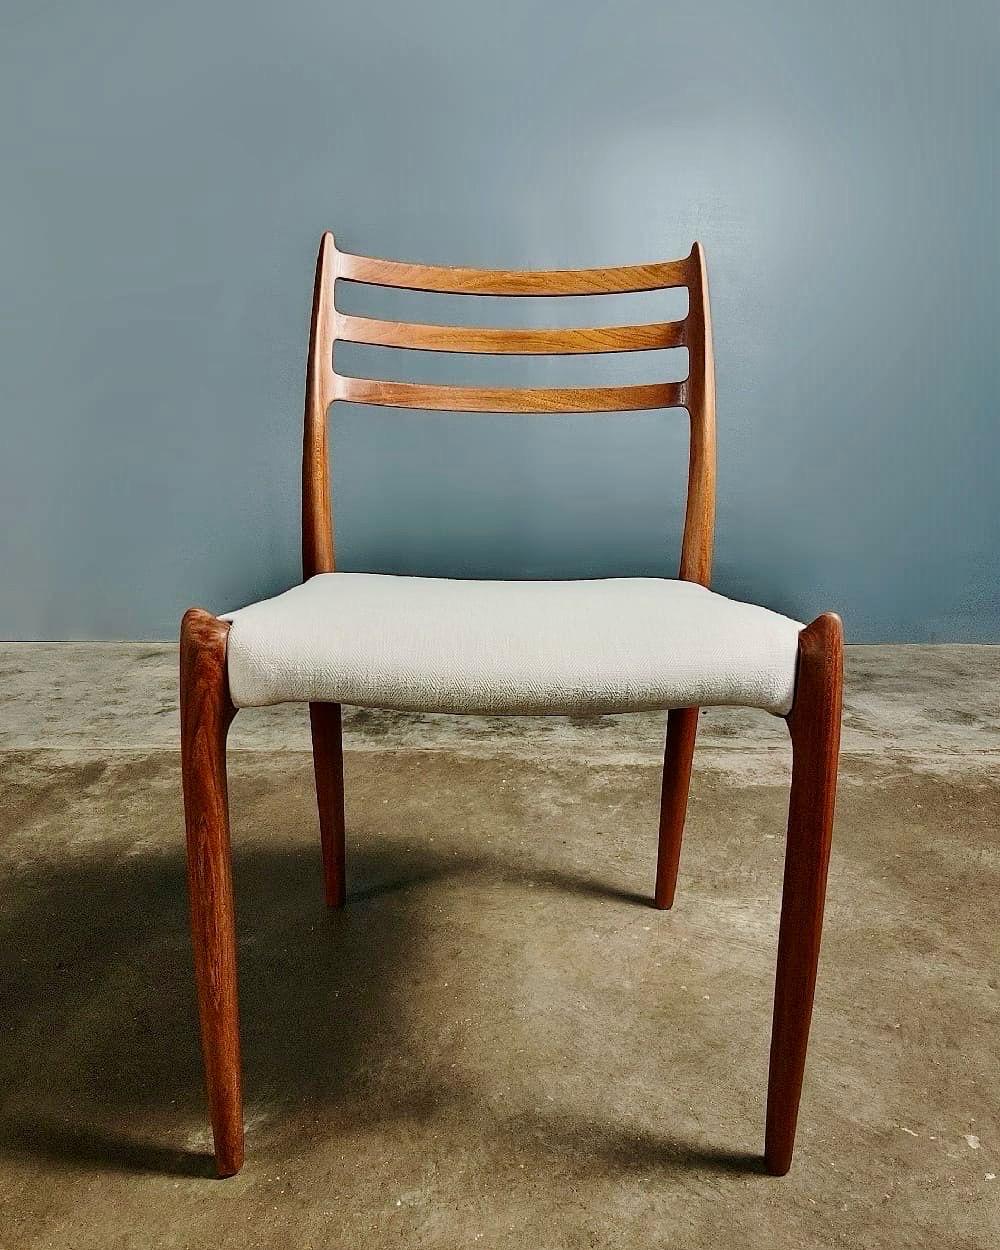 New Stock ✅

6 x Model 78 Teak Dining chairs by Niels Otto Moller for J.L. Mollers Mobelfabrik

In 1944, Niels Otto Møller founded J.L. Møllers Møbelfabrik in Denmark.

J. L. Møllers Møbelfabrik produces chairs of extremely high quality, in timeless